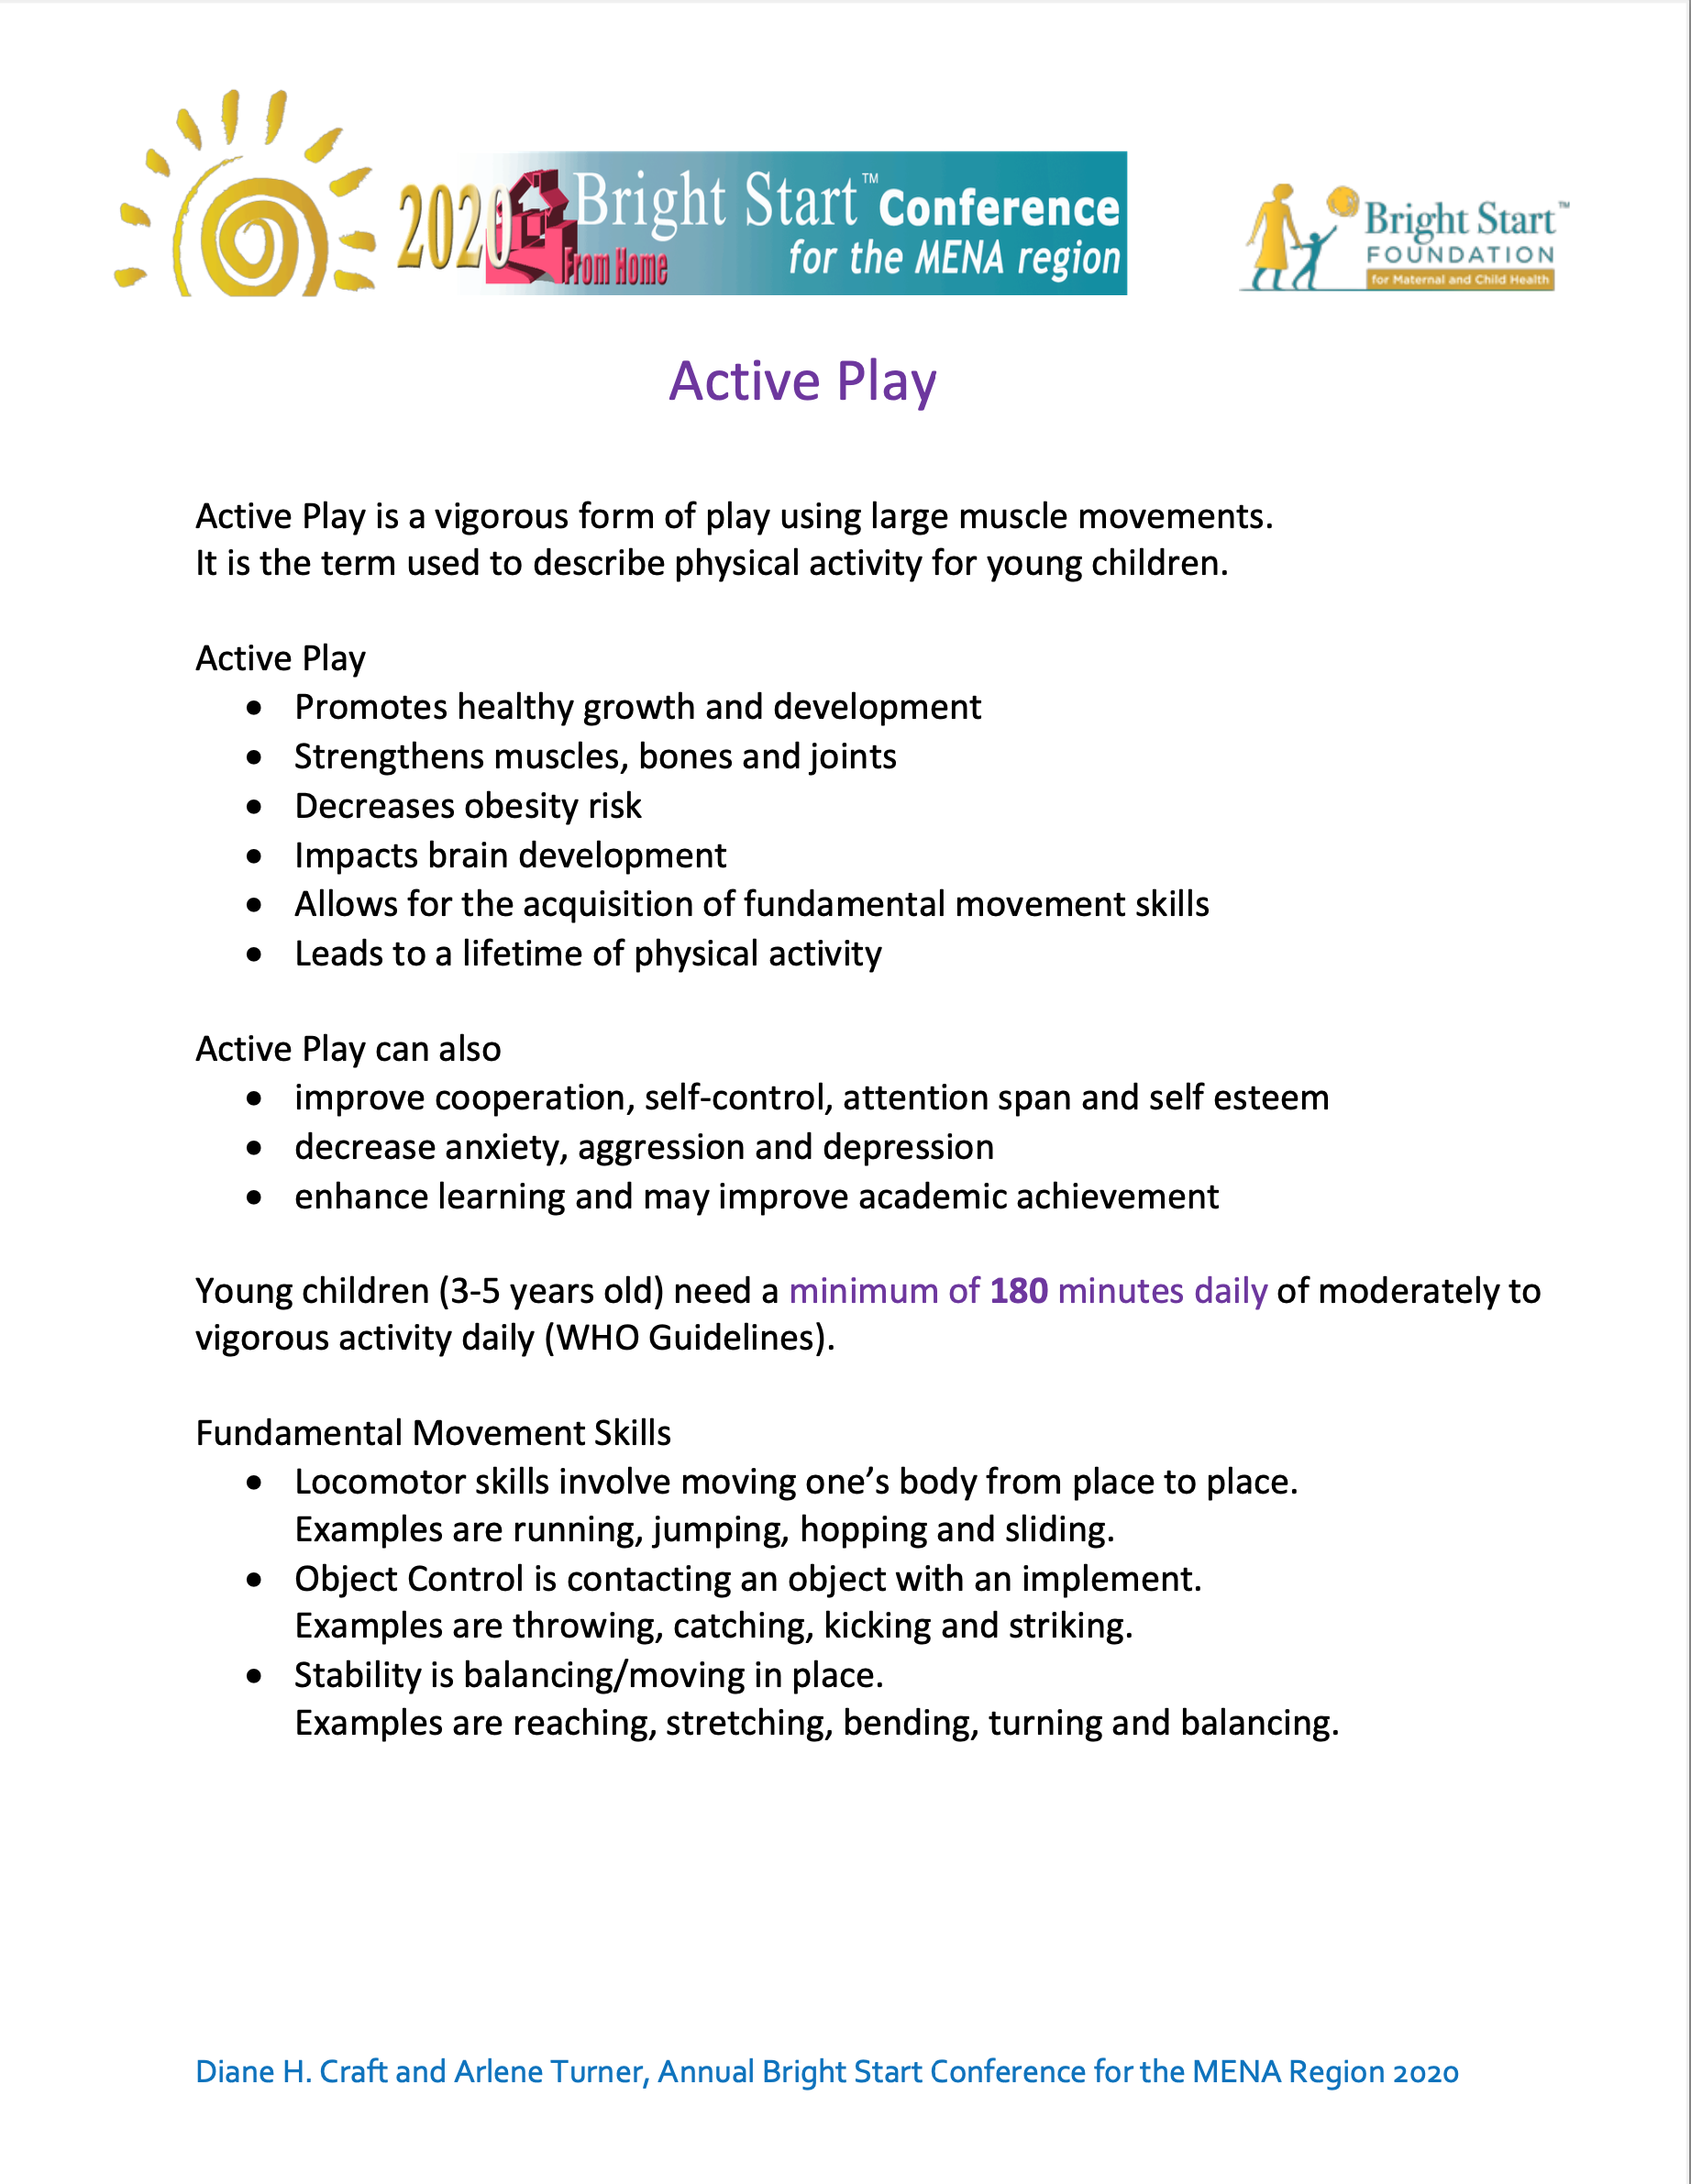 Handout for Active Play